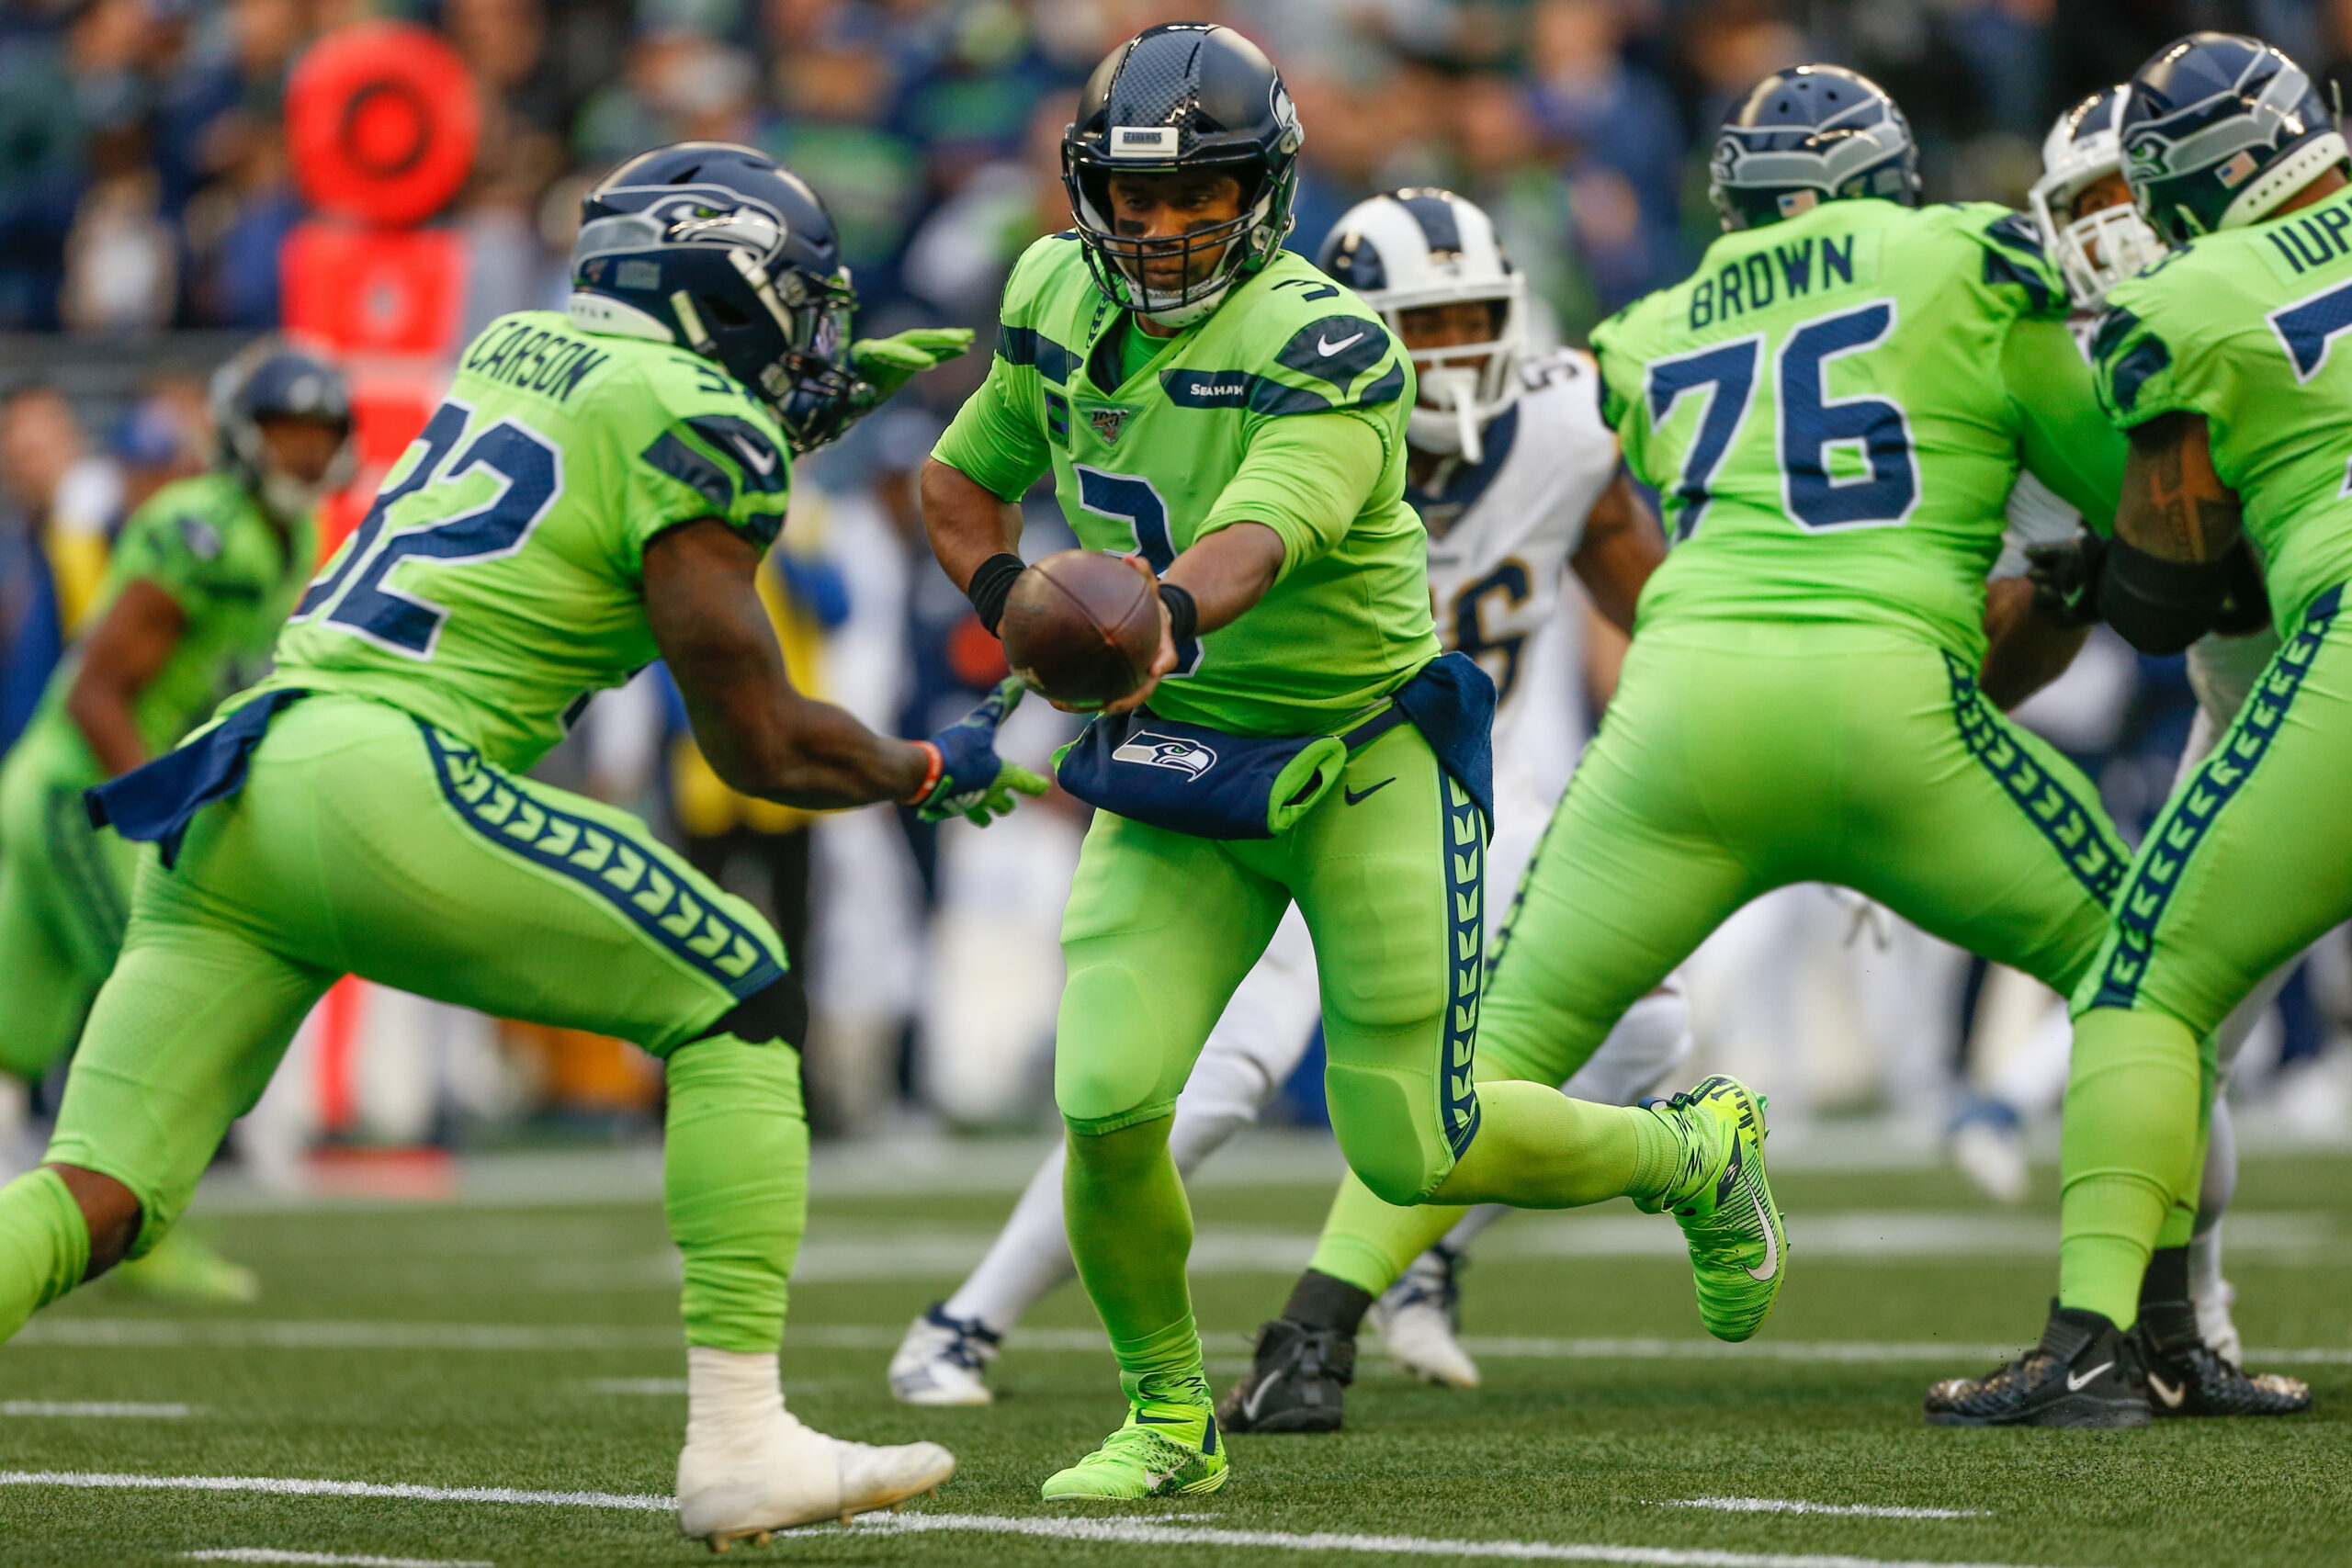 seahawk game today live stream